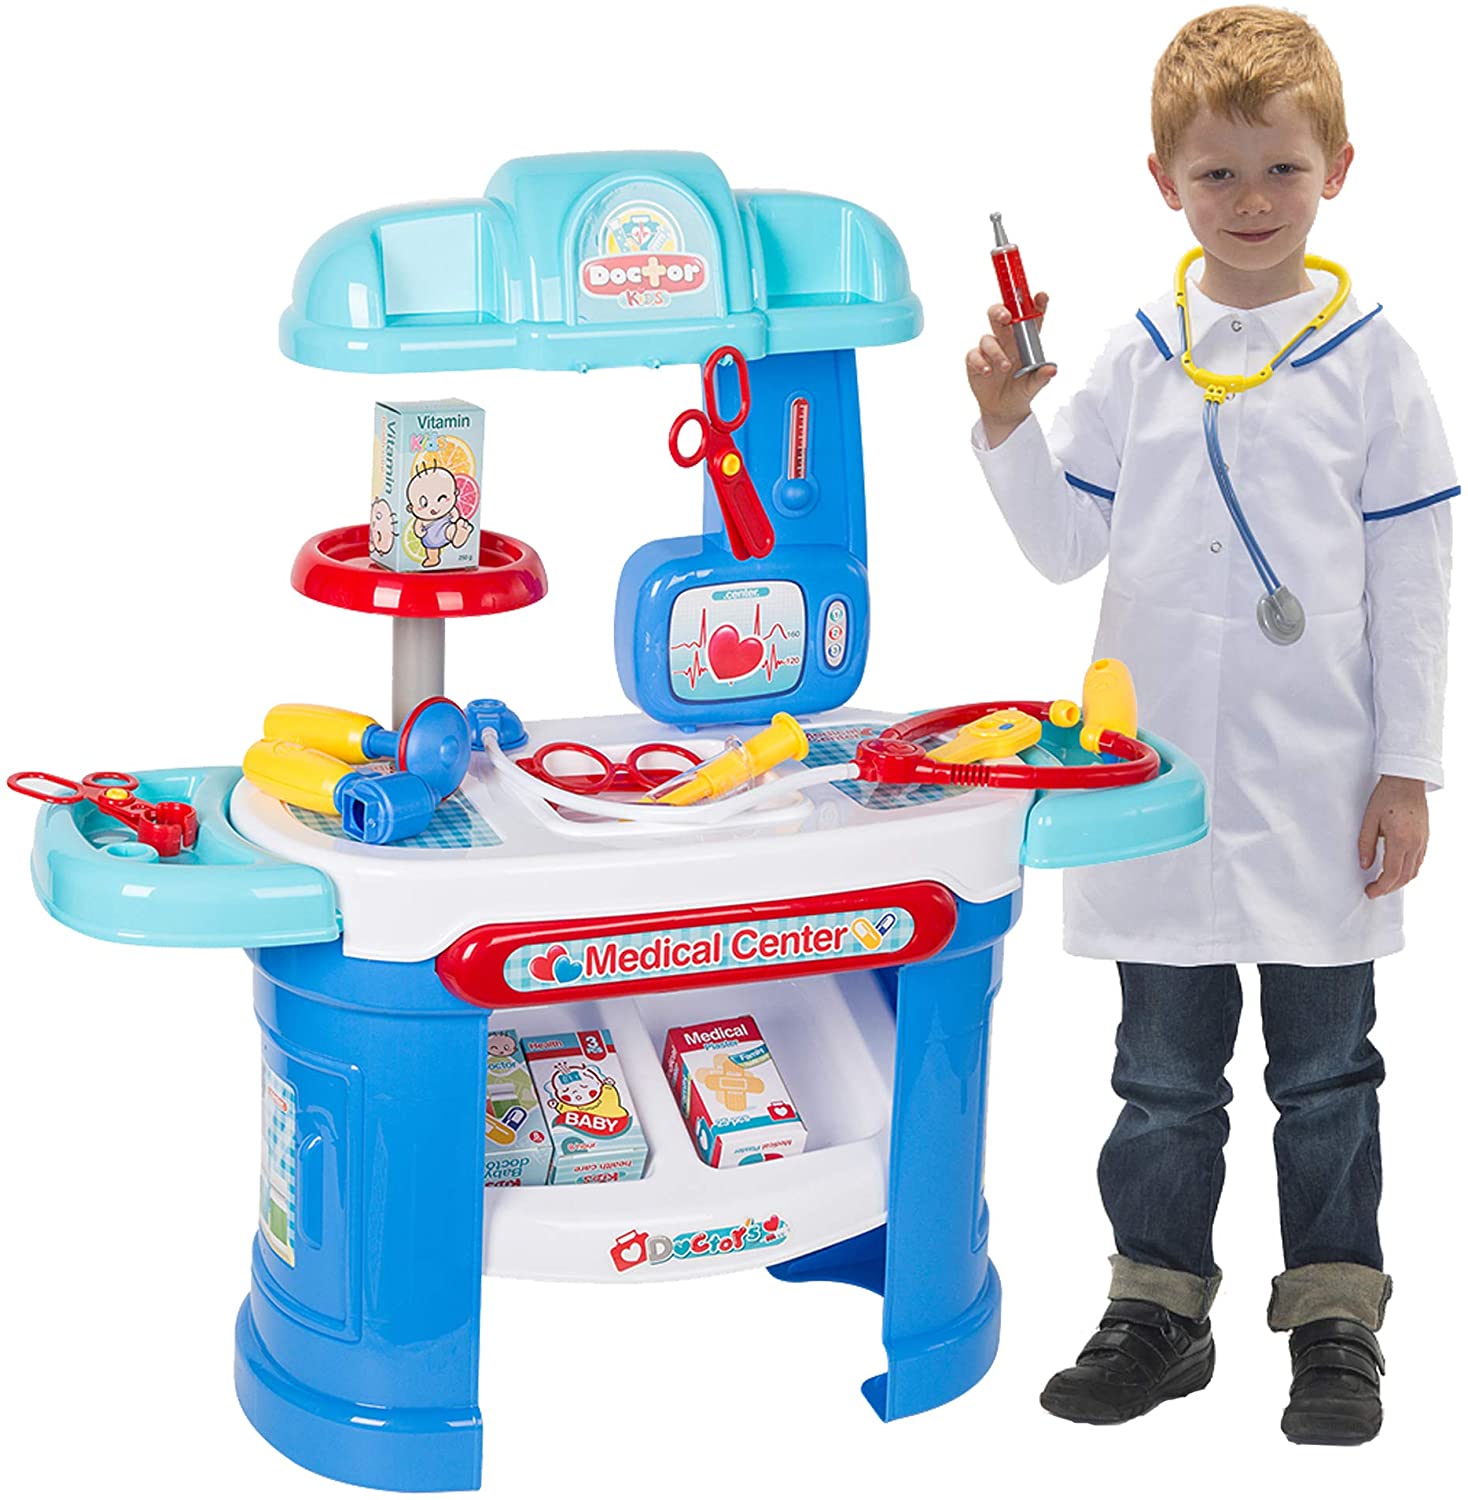 Pretend Medical Toy Doctor Kit for Toddler Dentist Playset-15 Medical Equipment with a Sturdy Medical Table